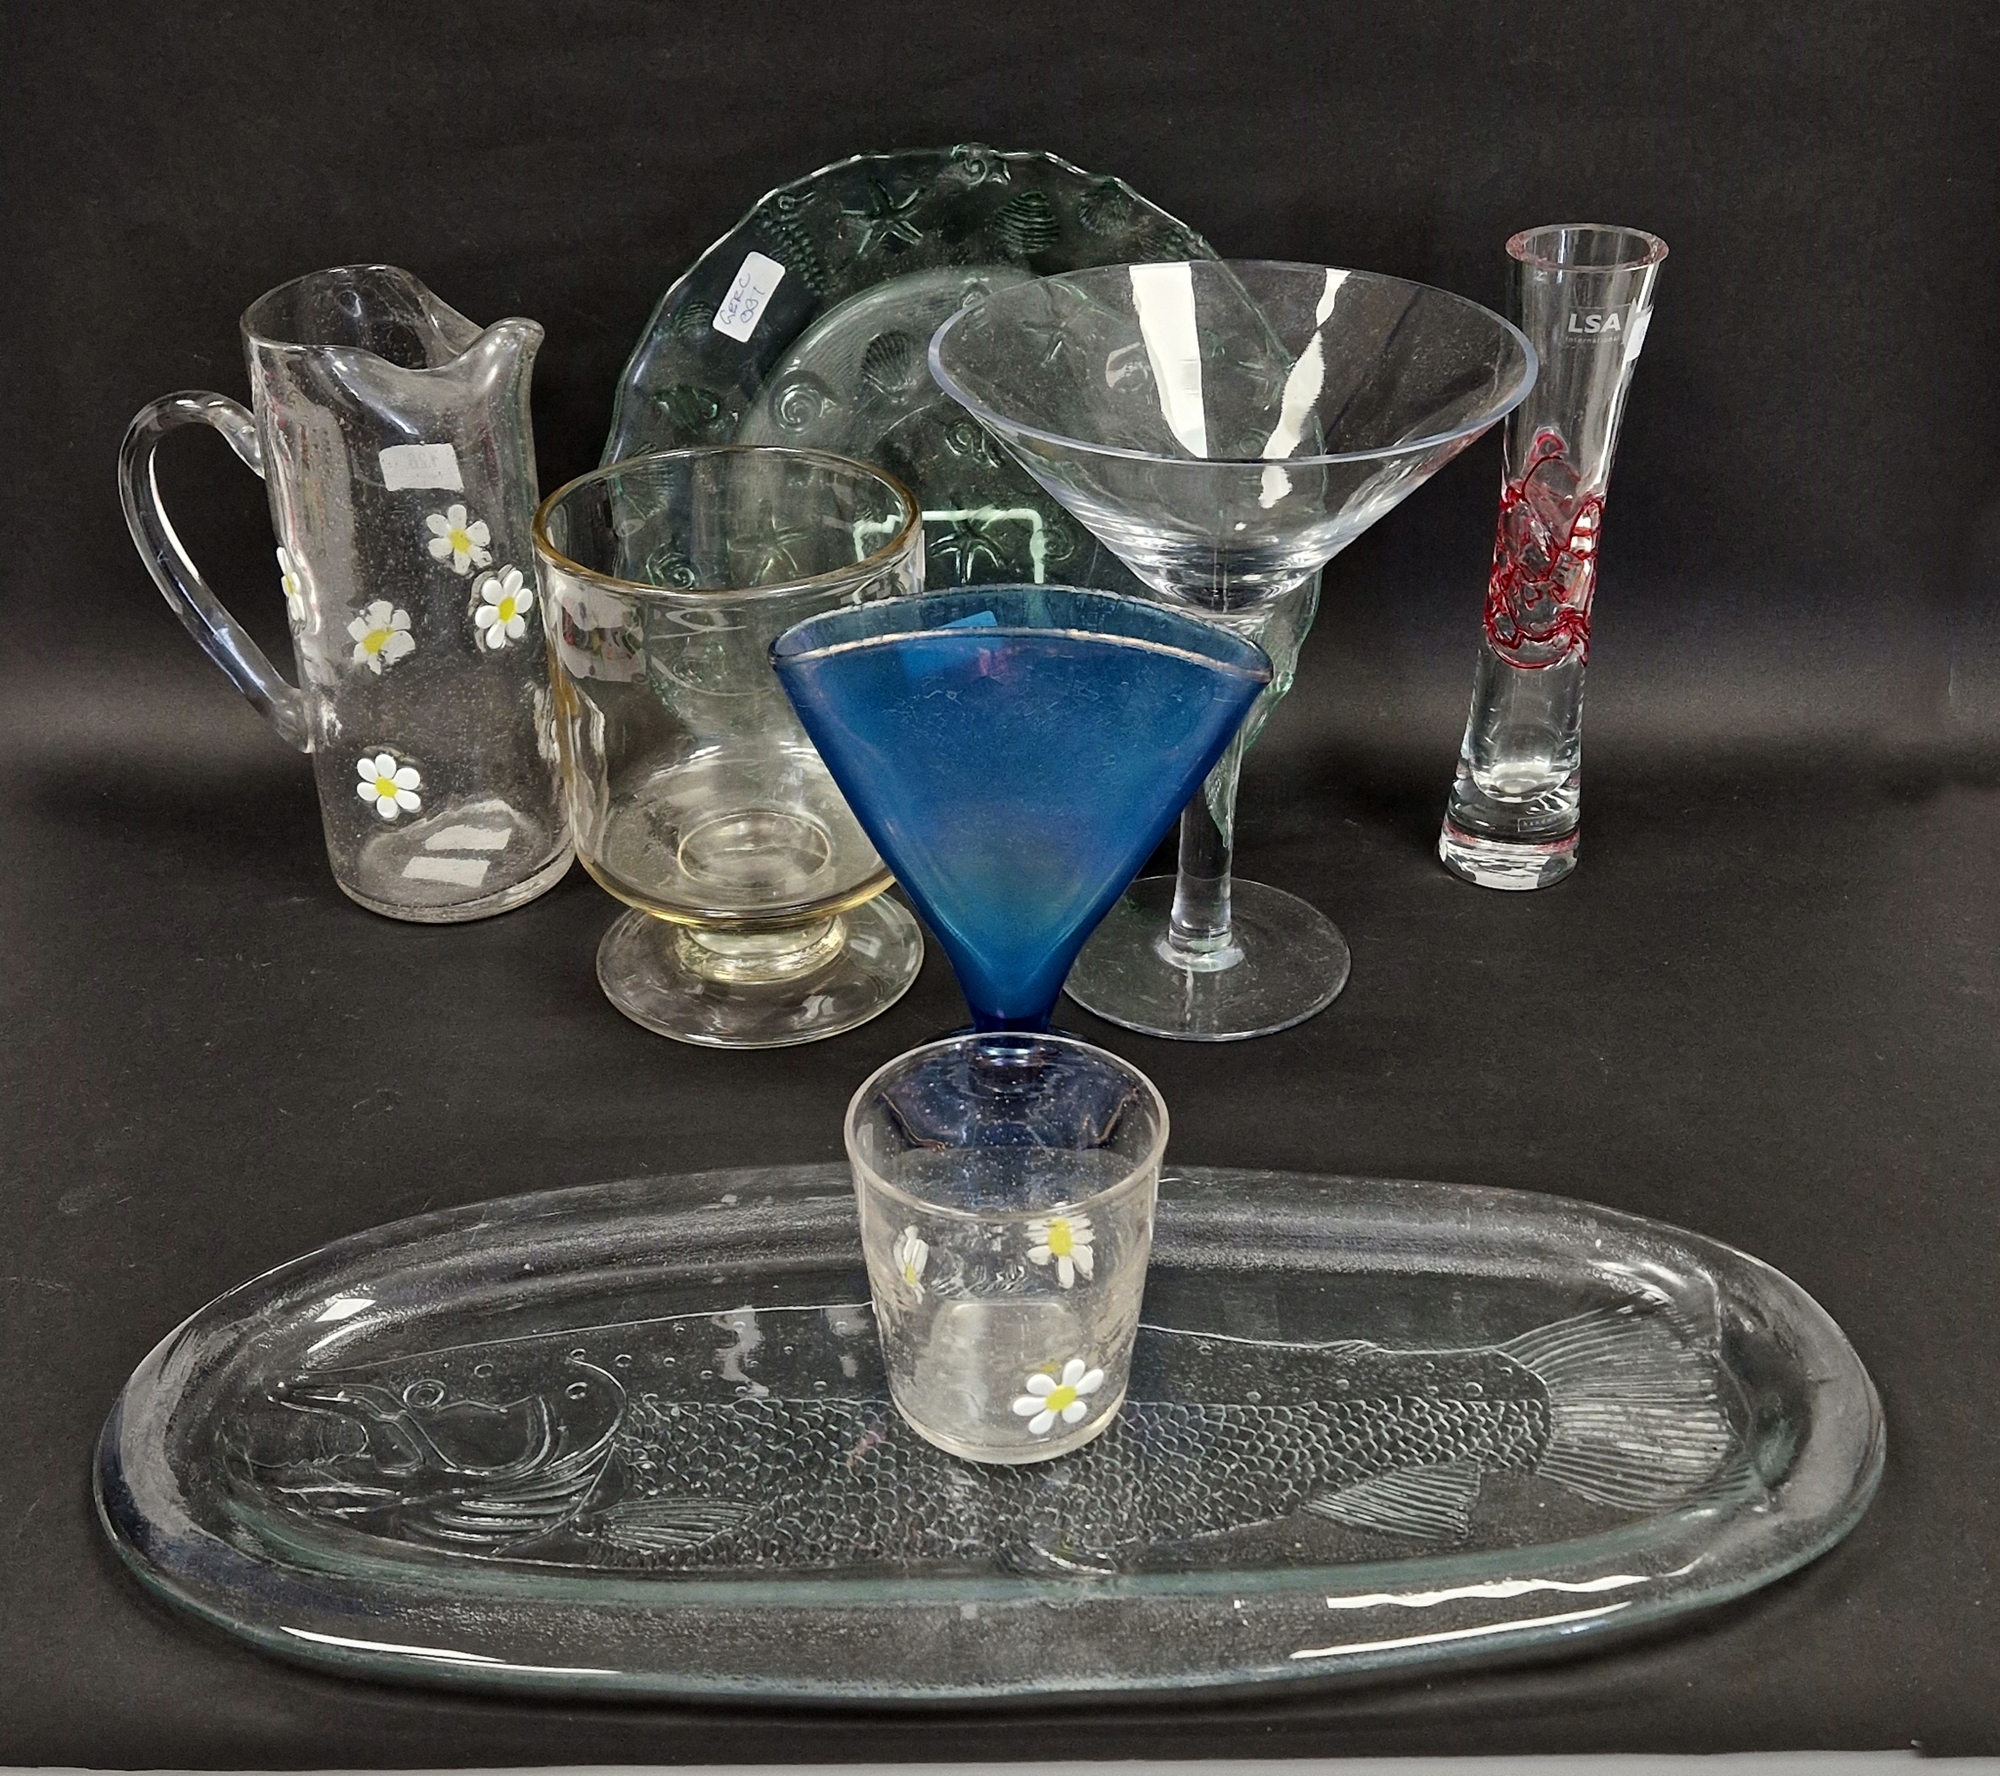 Handblown trifle bowl centrepiece, a large Martini glass, a pressed glass seafood platter in green